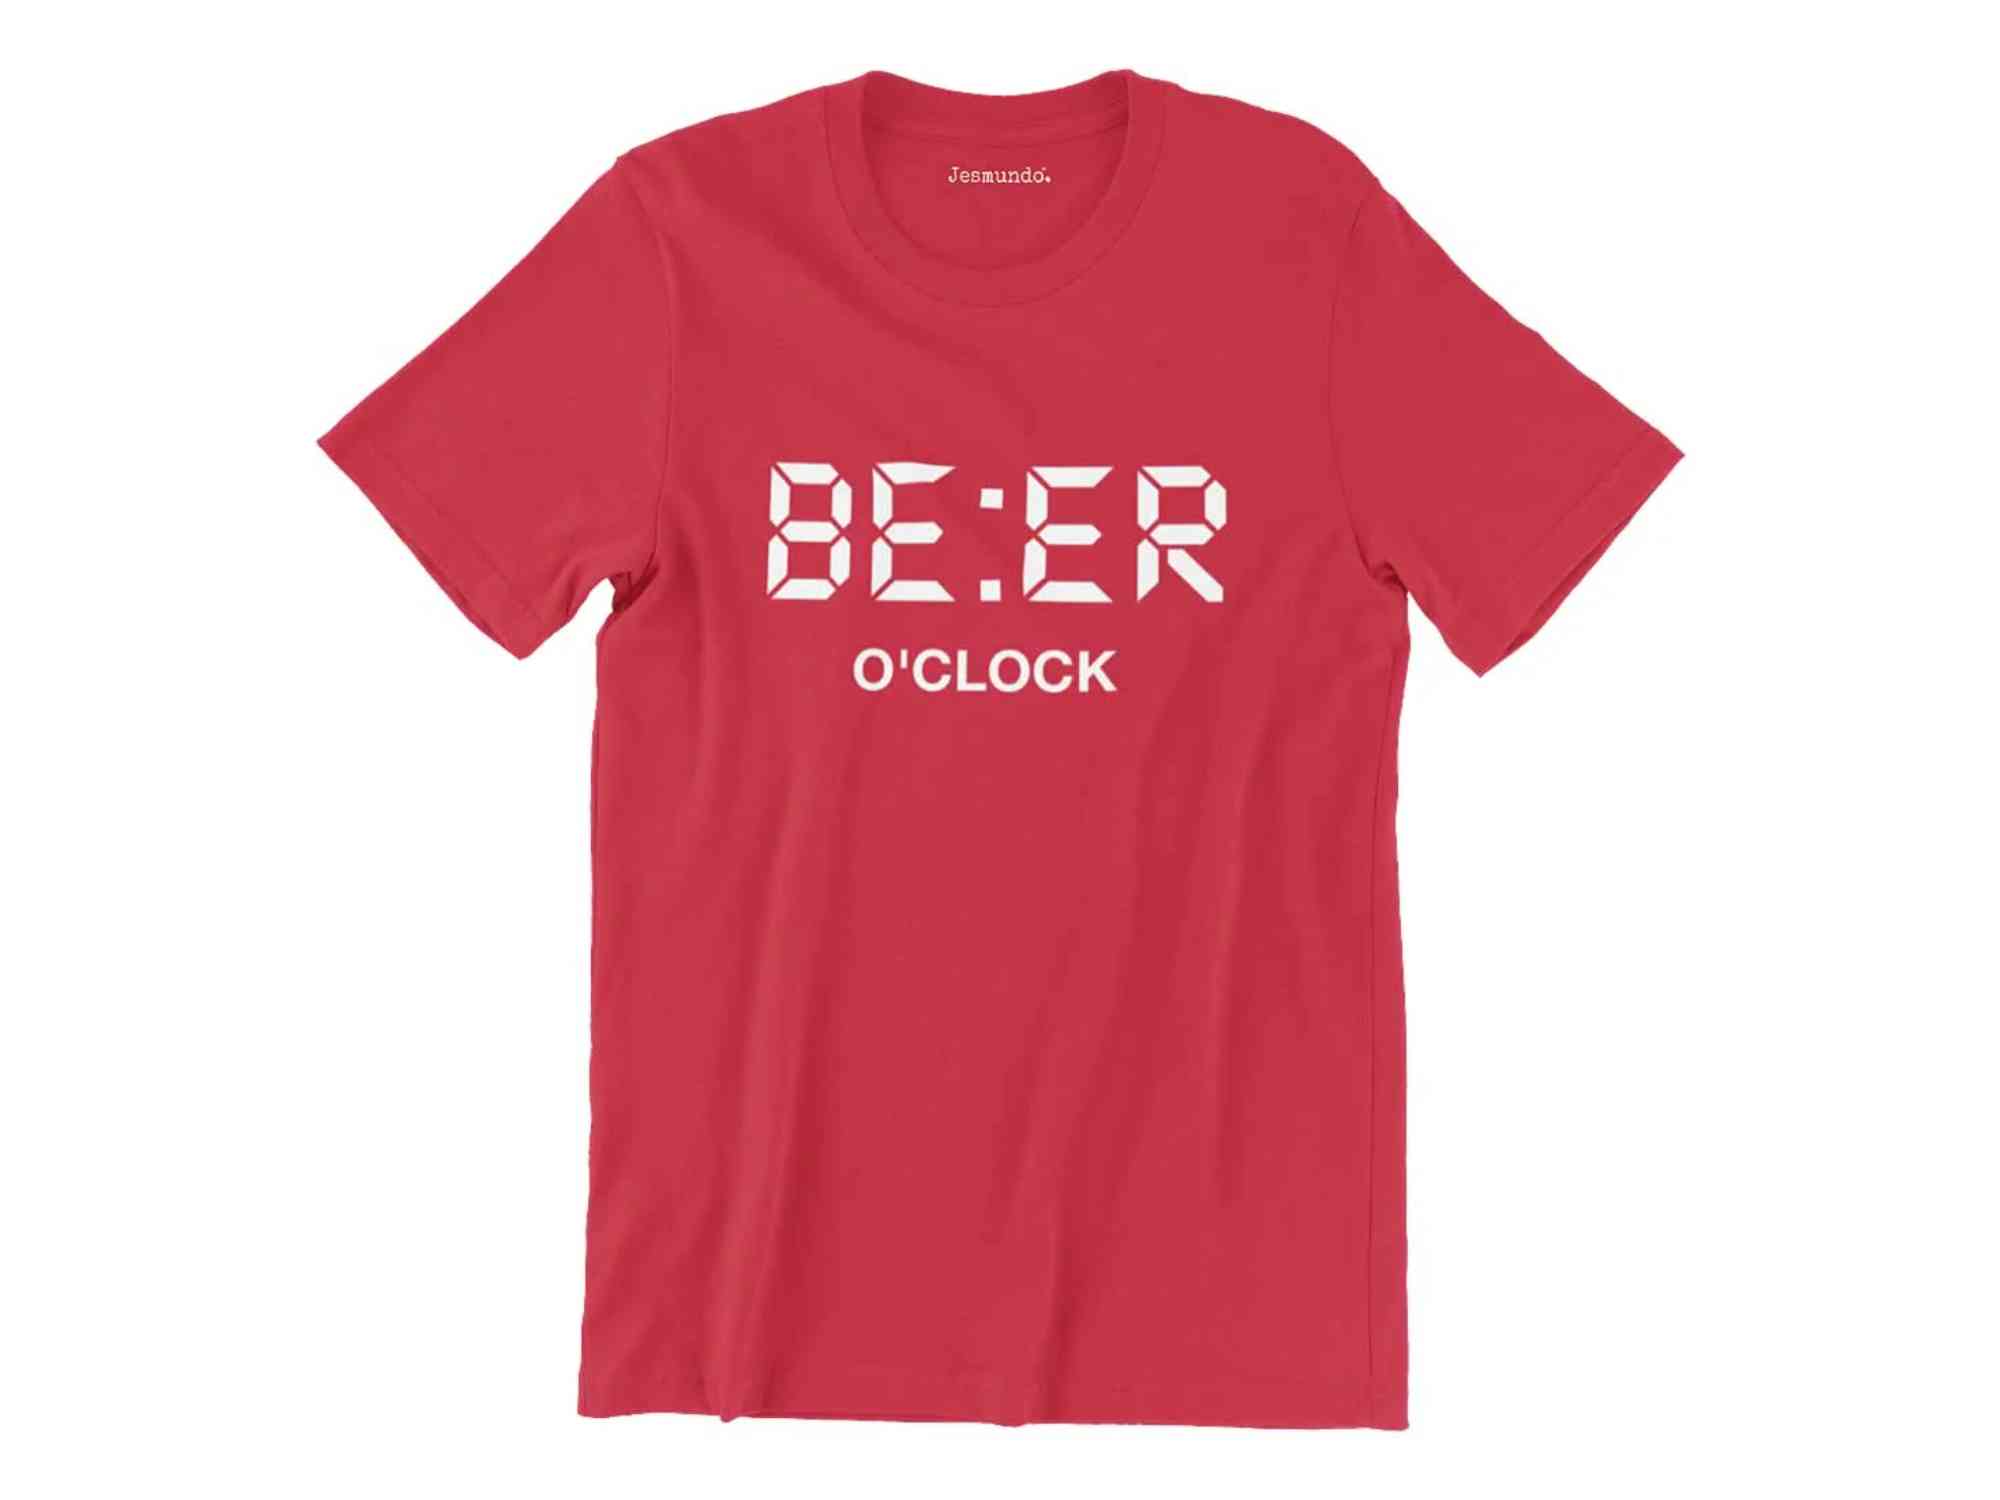 Cheap Stag Do T-Shirts - Beer O'clock